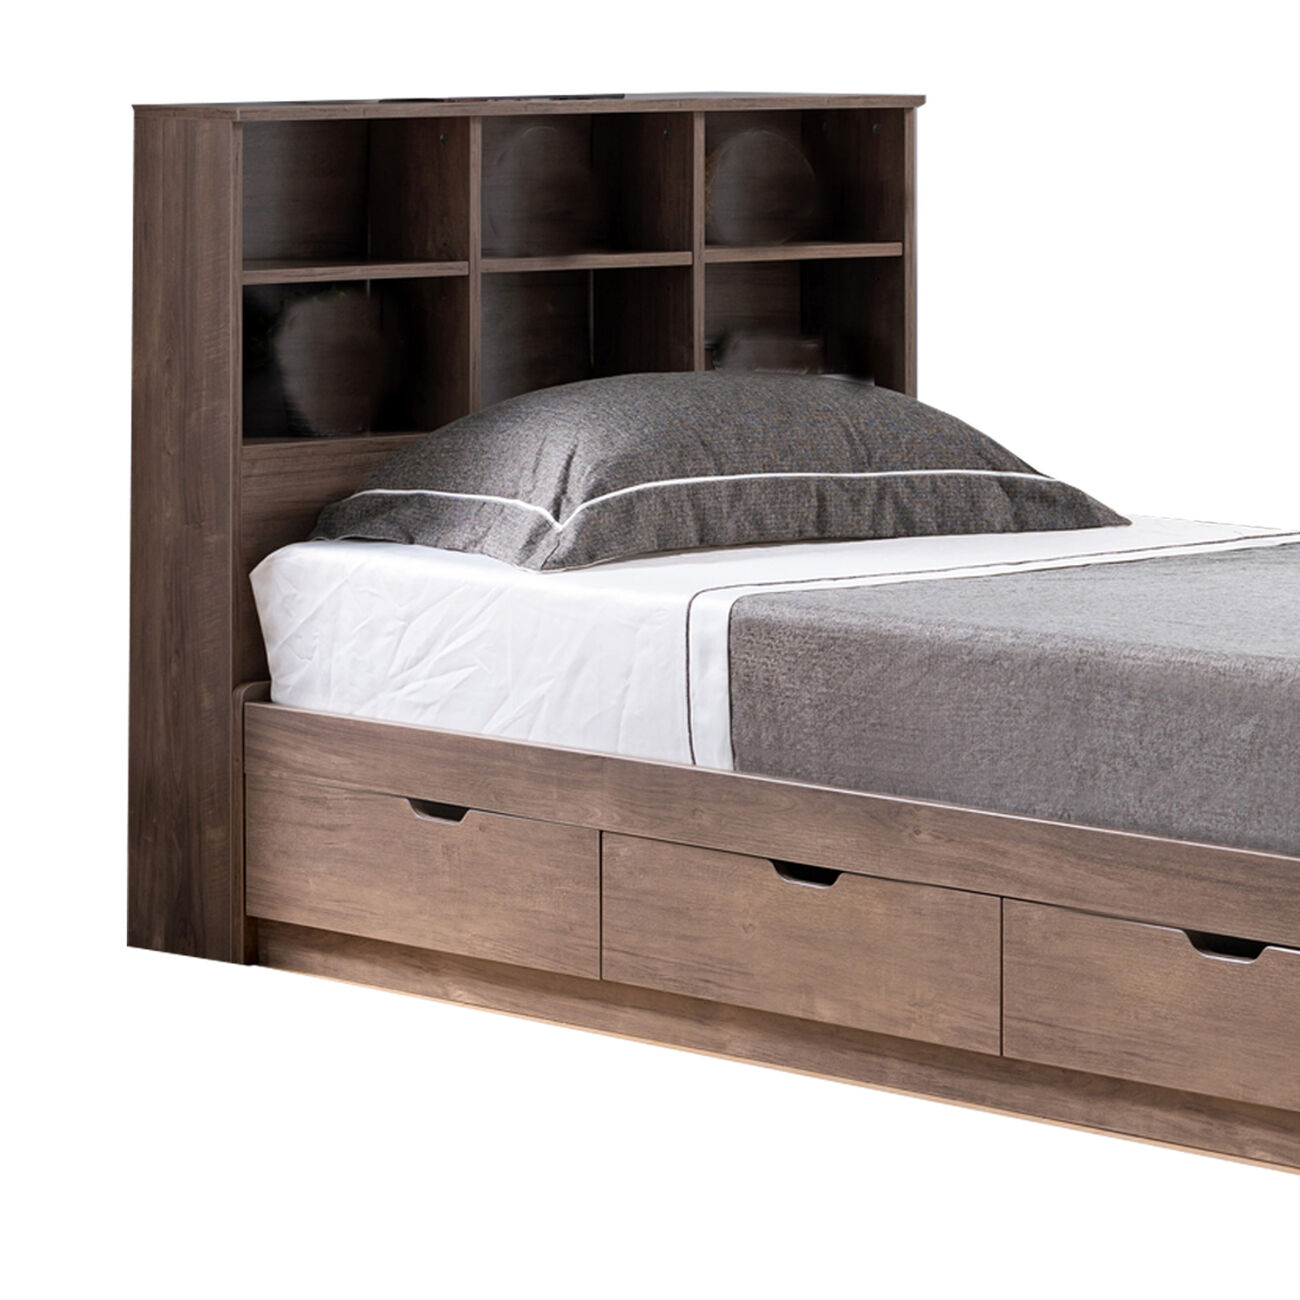 Wooden Frame 3 Drawers Twin Size Chest Bed, Hazelnut Brown